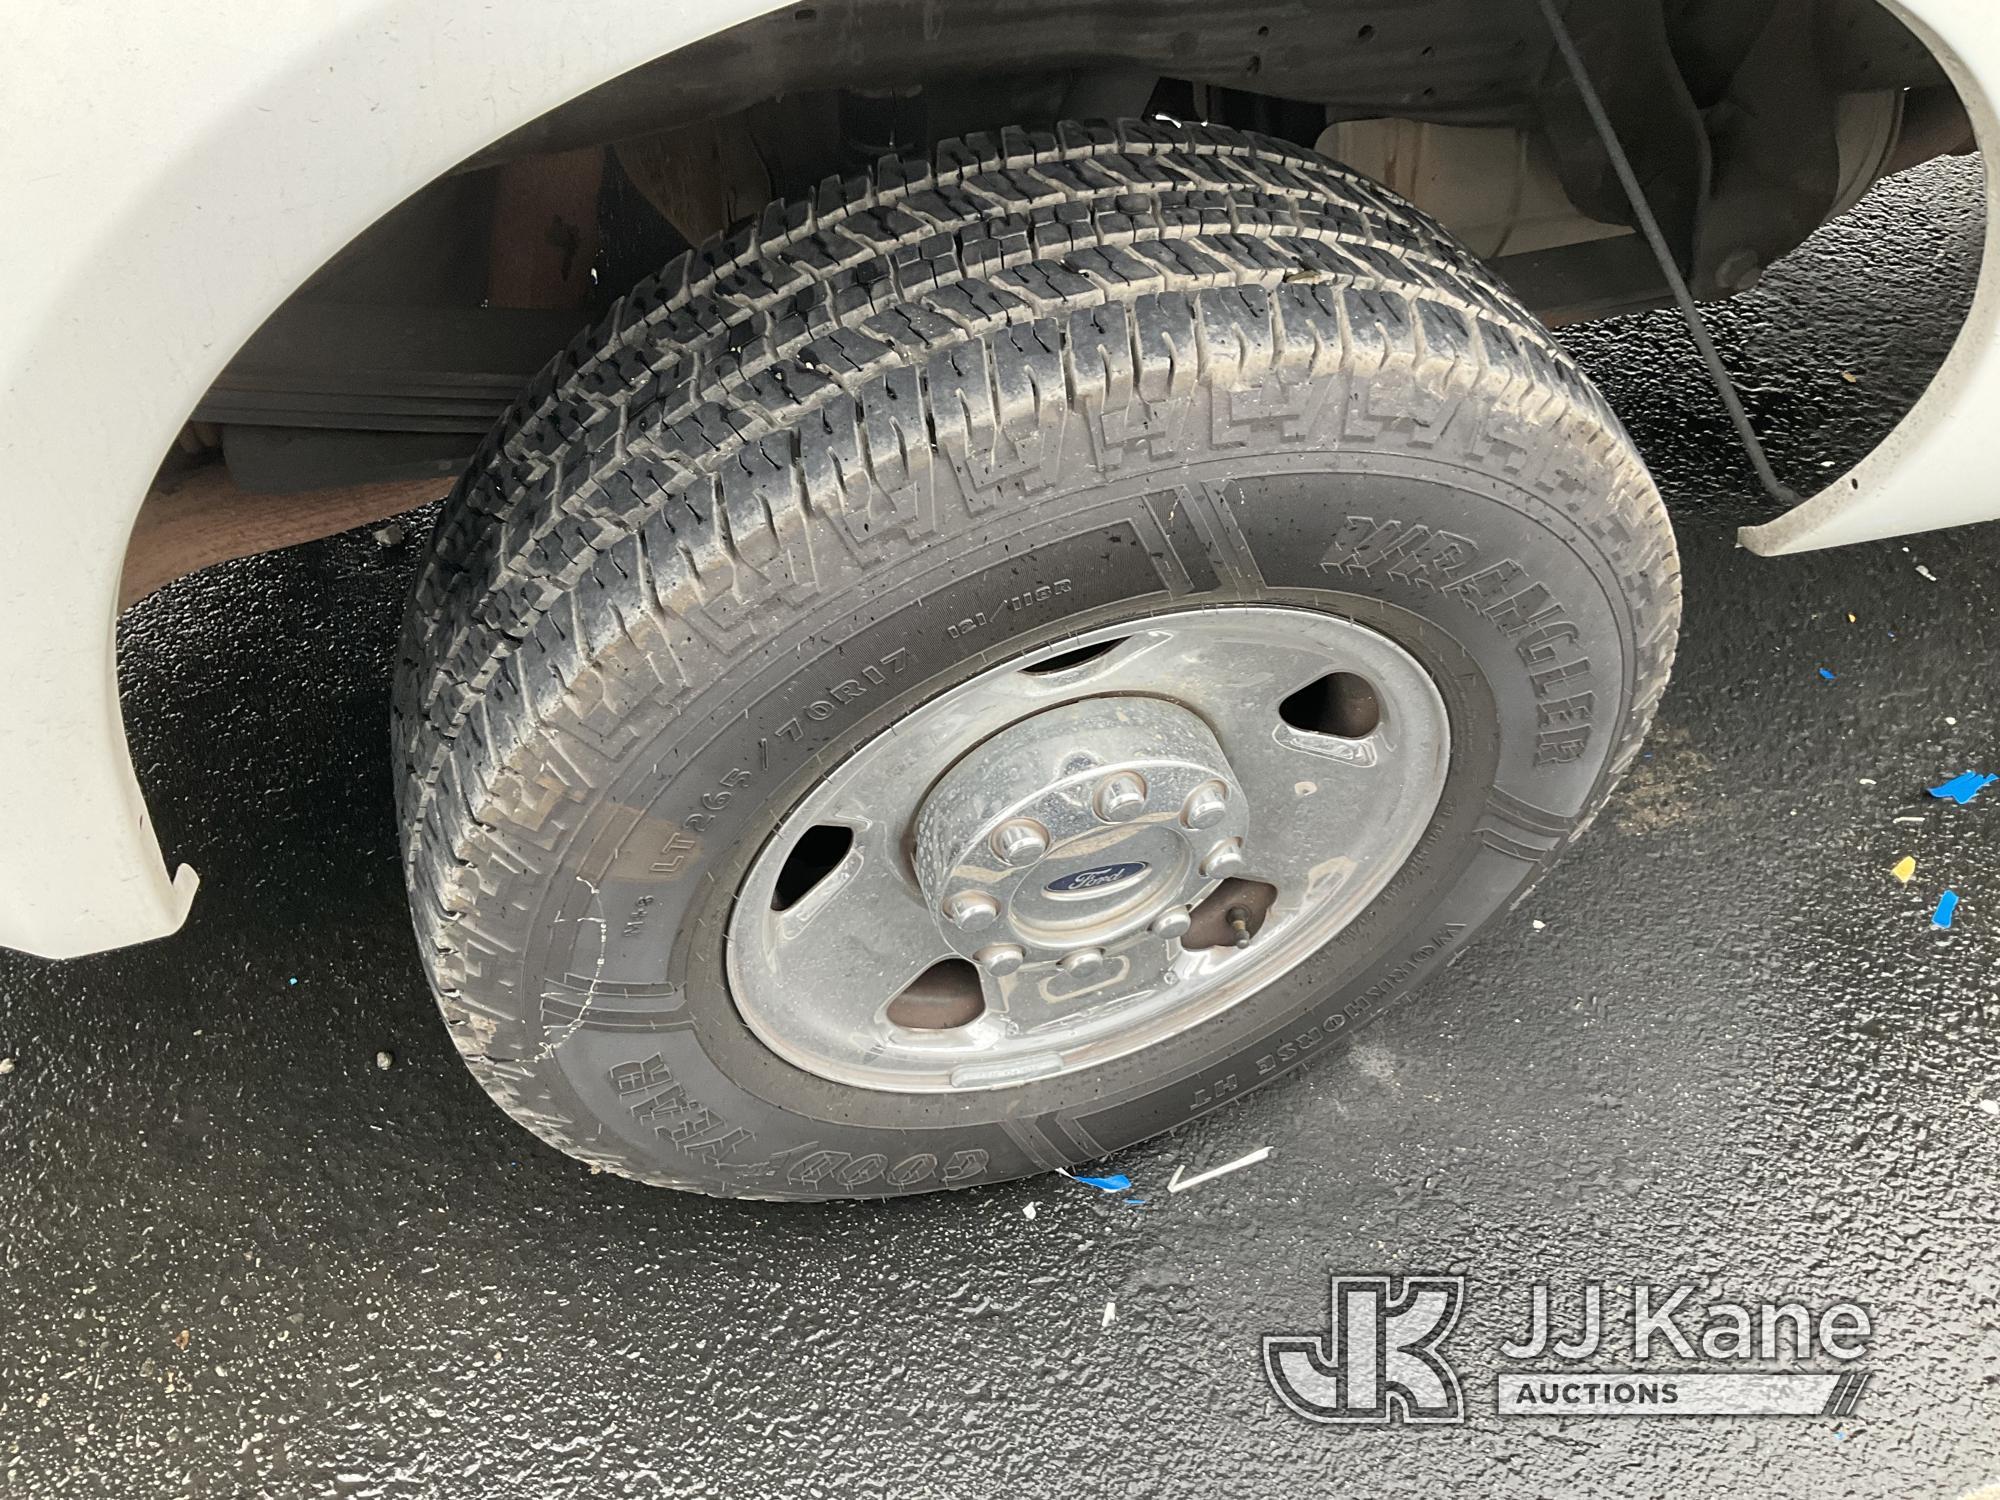 (Jurupa Valley, CA) 2006 Ford F-250 SD Crew-Cab Pickup Truck Runs & Moves, Horn Does Not Work